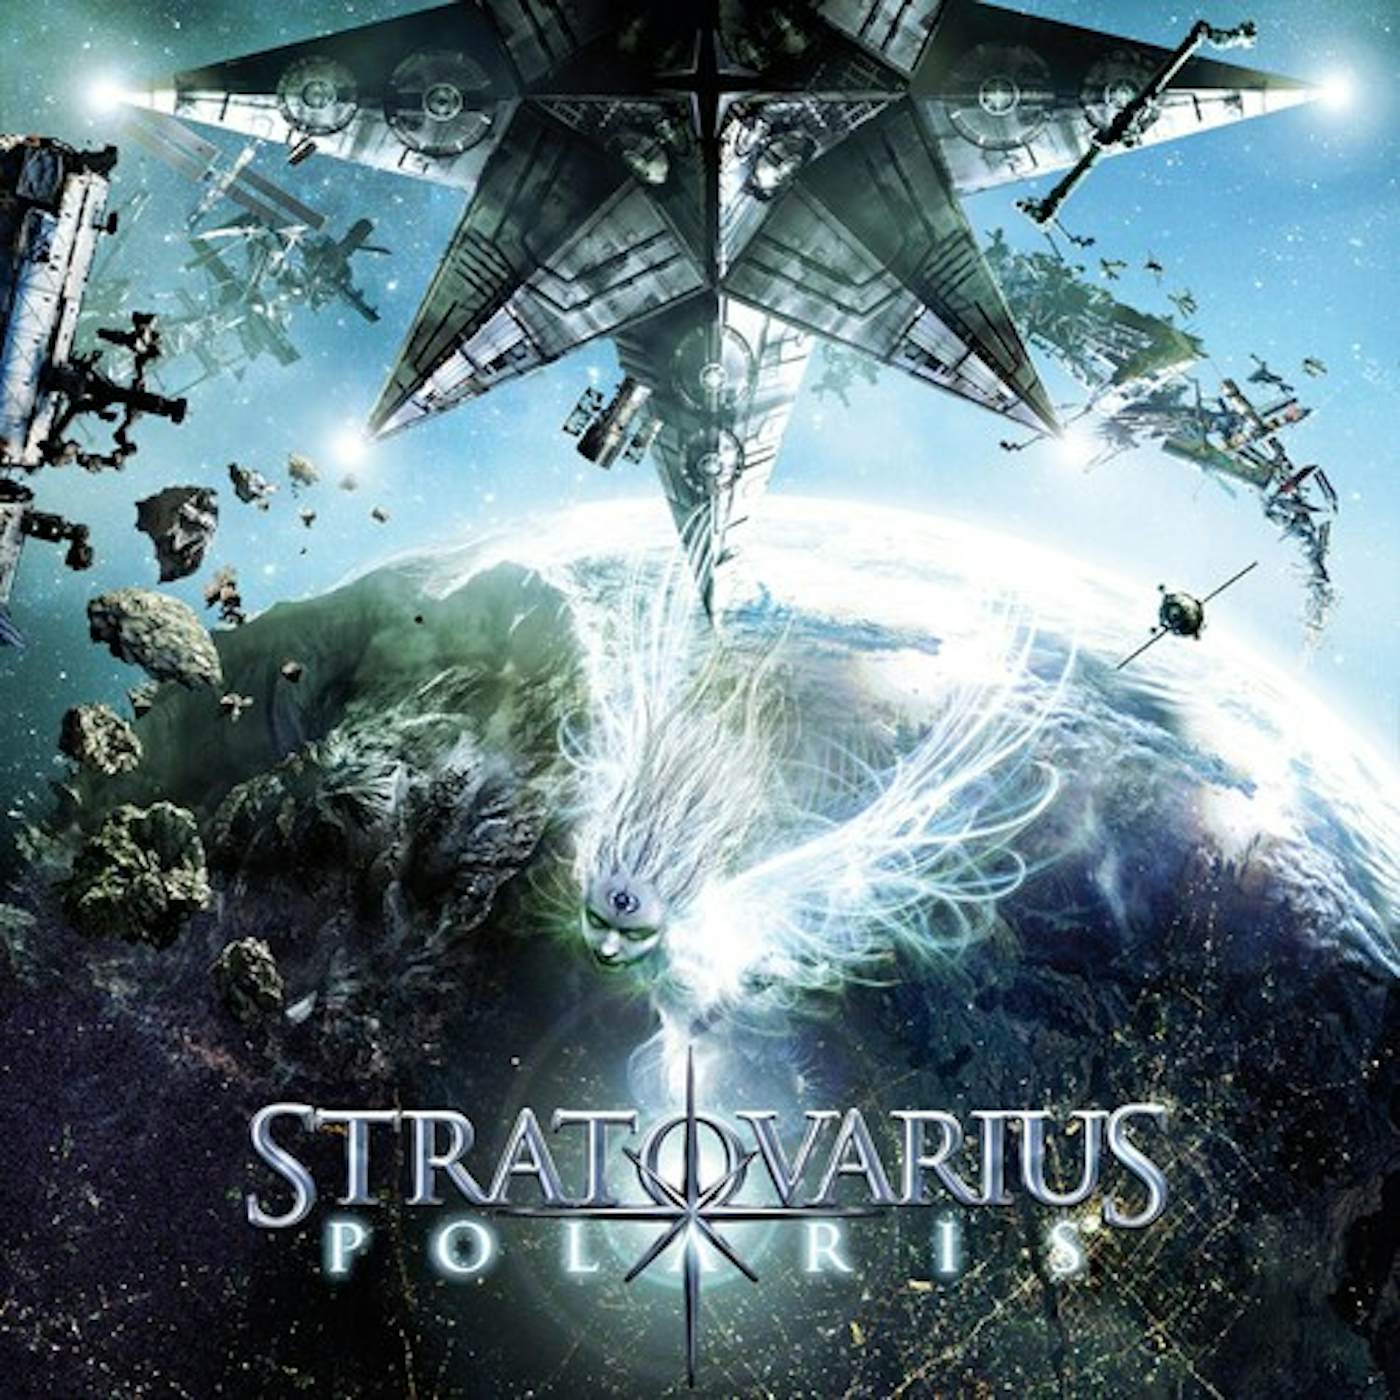 Stratovarius Gifts & Merchandise for Sale